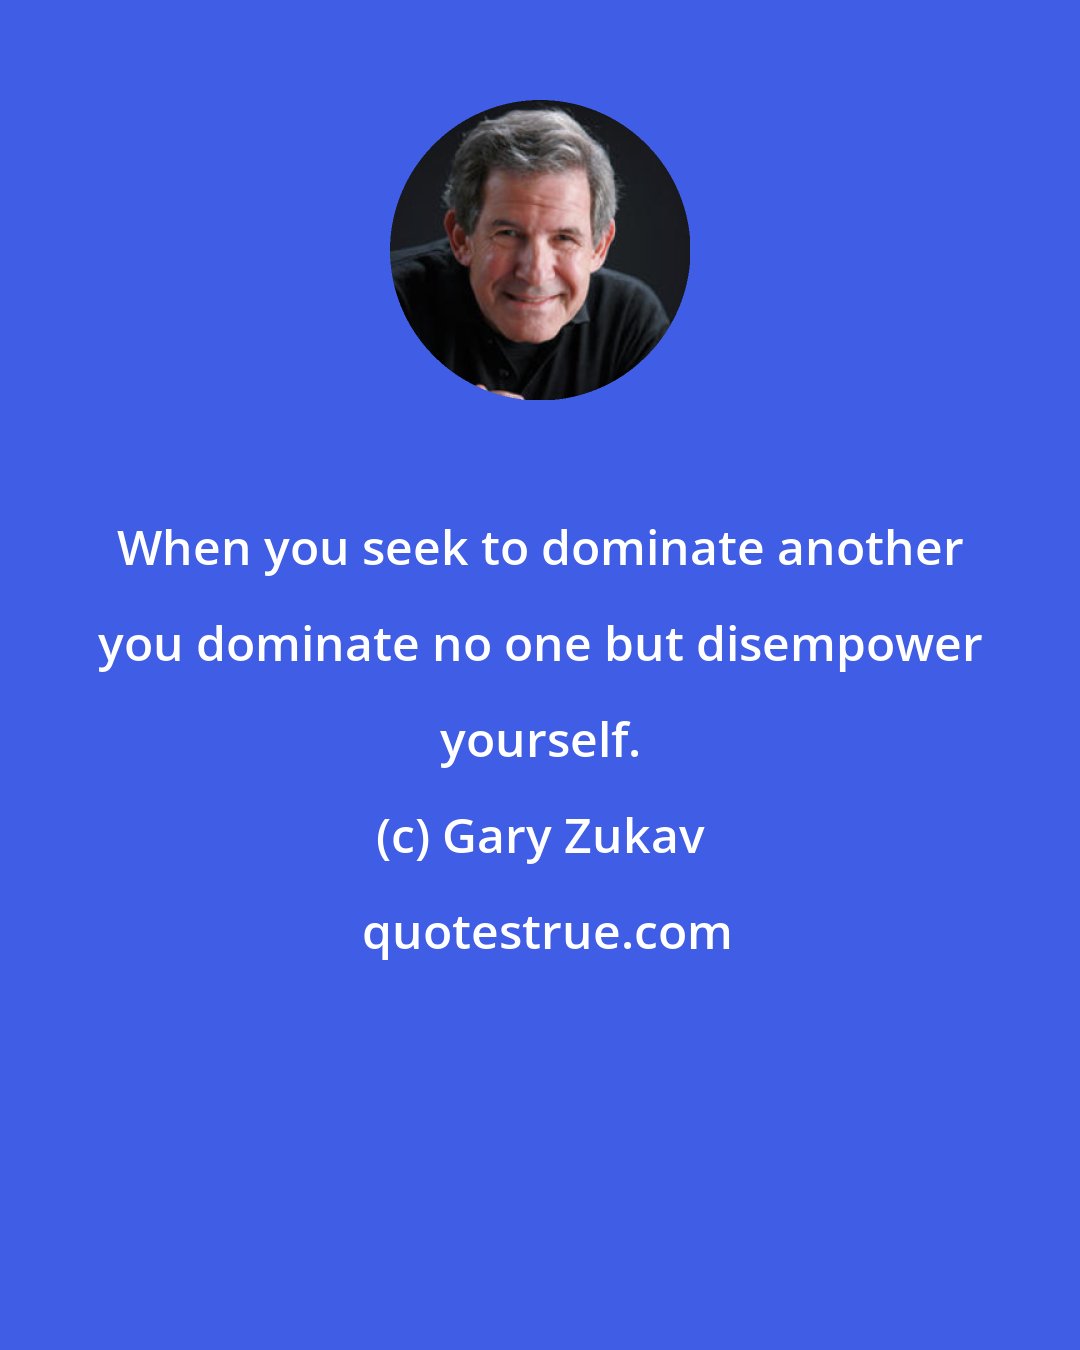 Gary Zukav: When you seek to dominate another you dominate no one but disempower yourself.